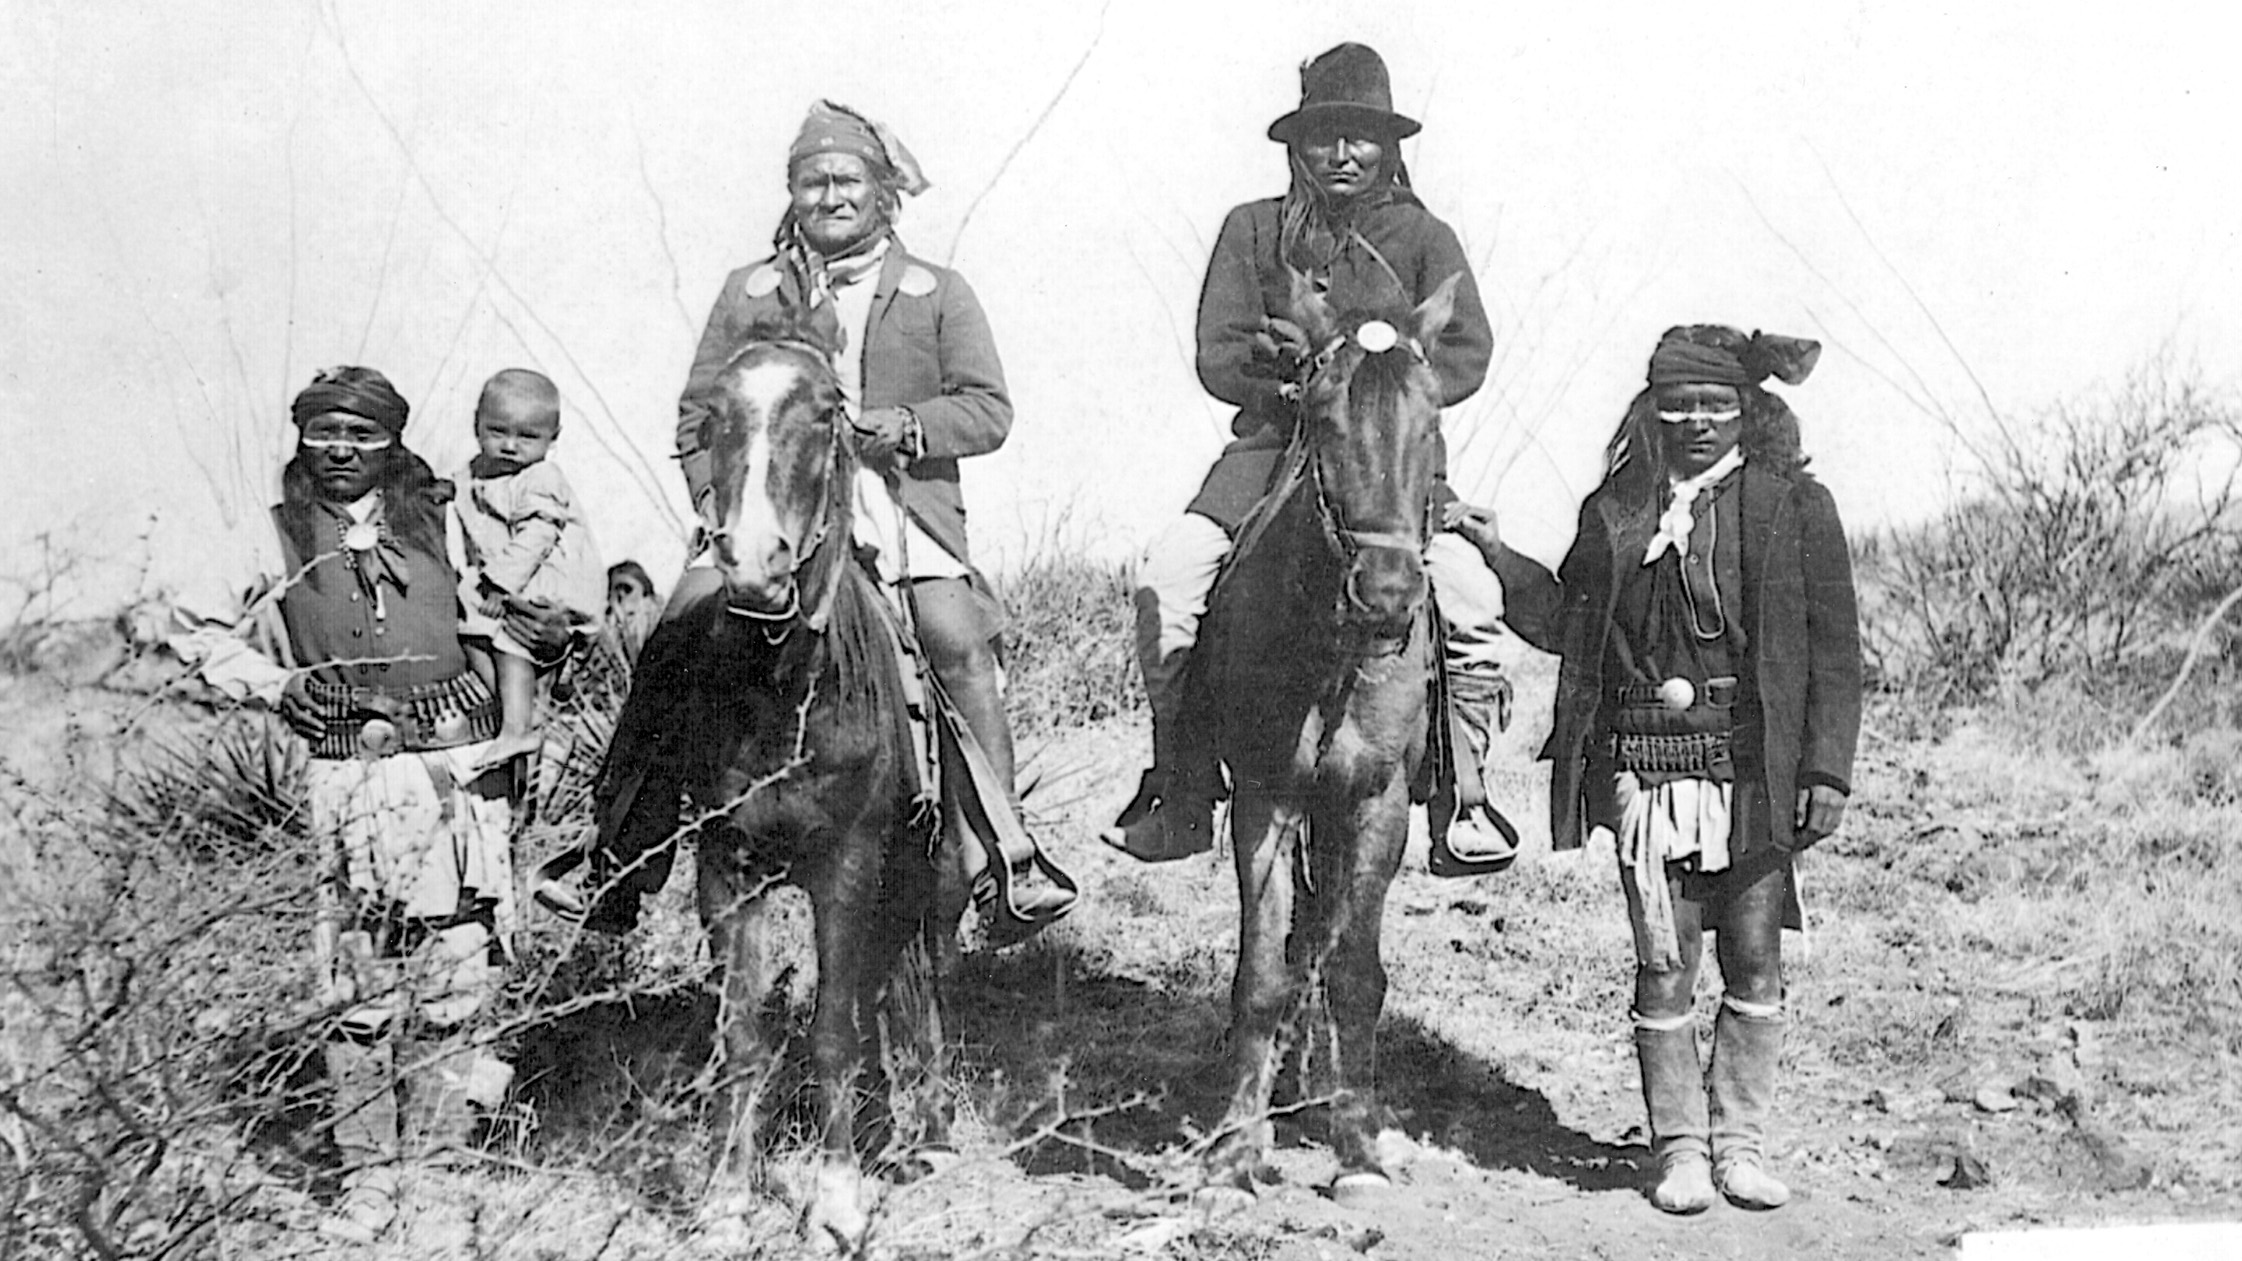 Geronimo and Naiche (with dark hat) , both mounted on ponies, pose with other tribe members in the 1880s. Naiche was the son of Cochise and the last chief of the free Chiricahua Apaches.